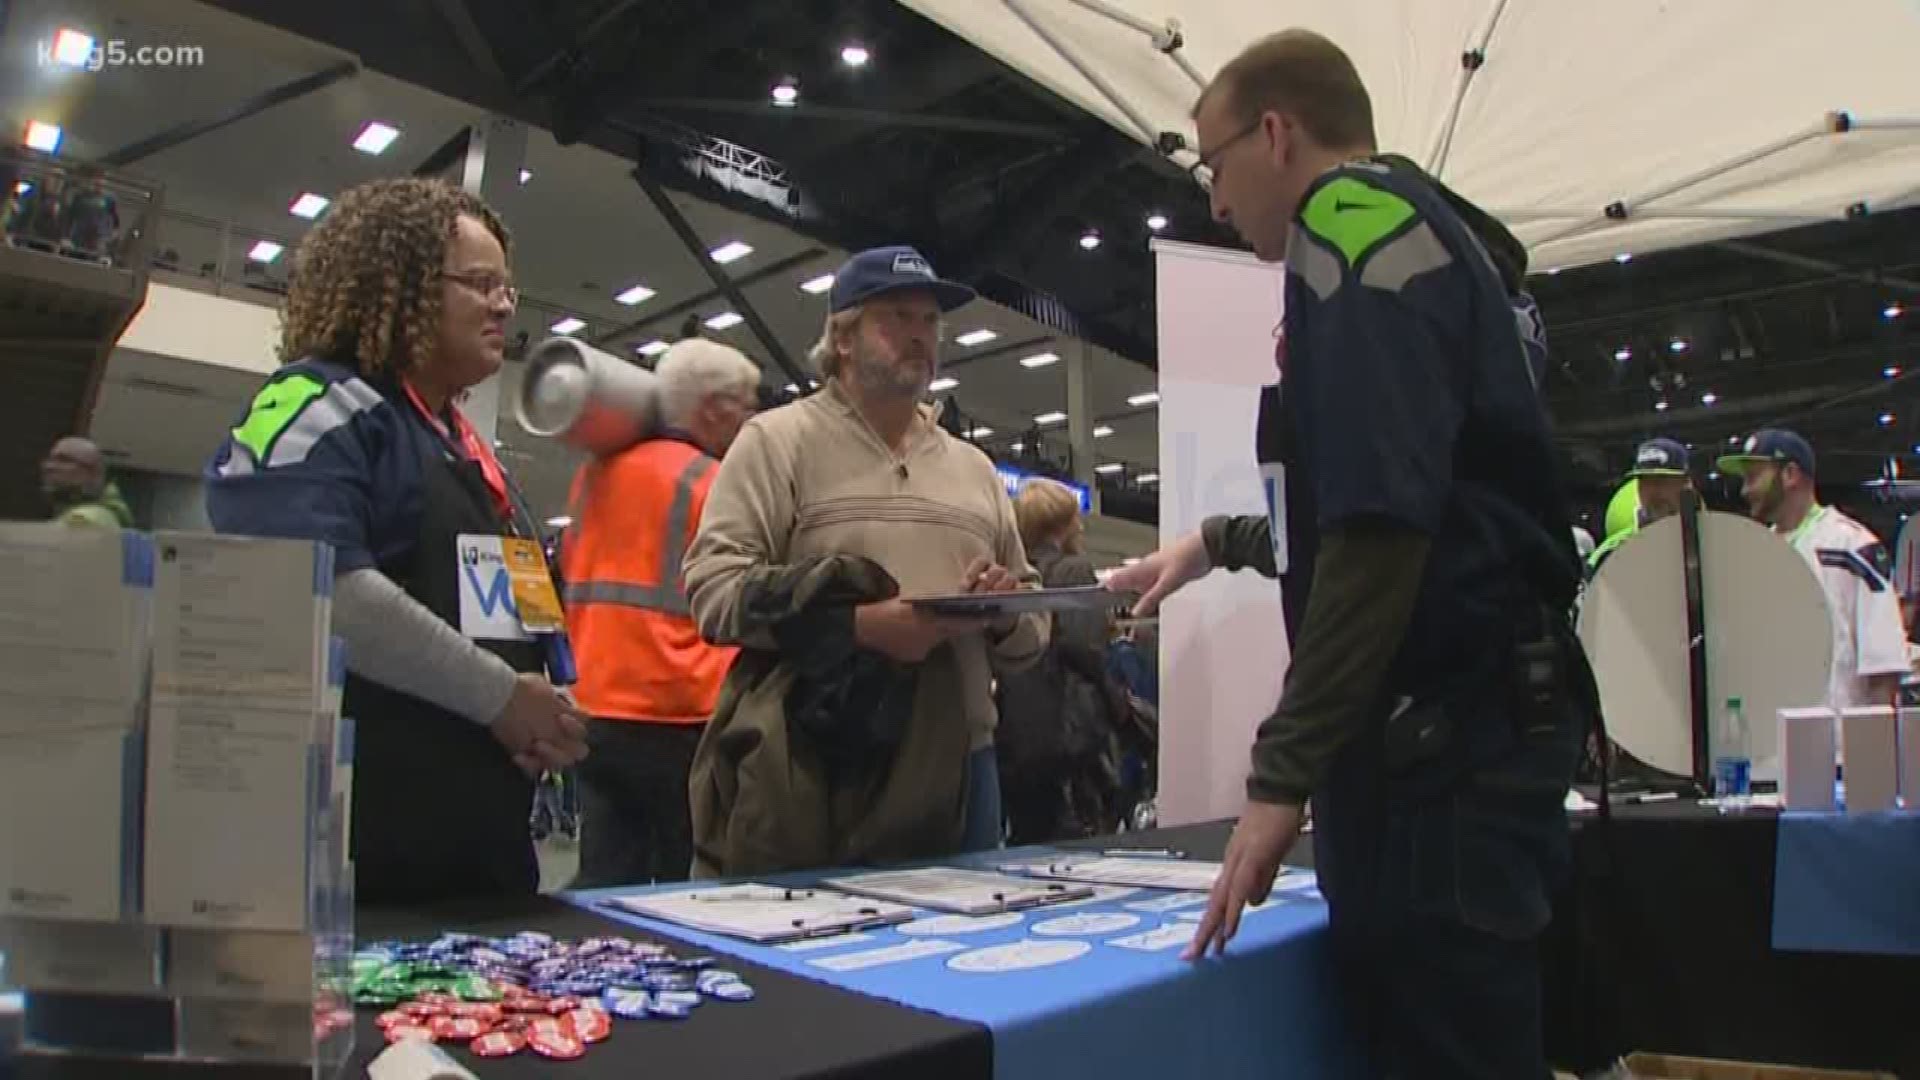 Seahawks fans had the opportunity to register to vote during Sunday’s game at CenturyLink Field.